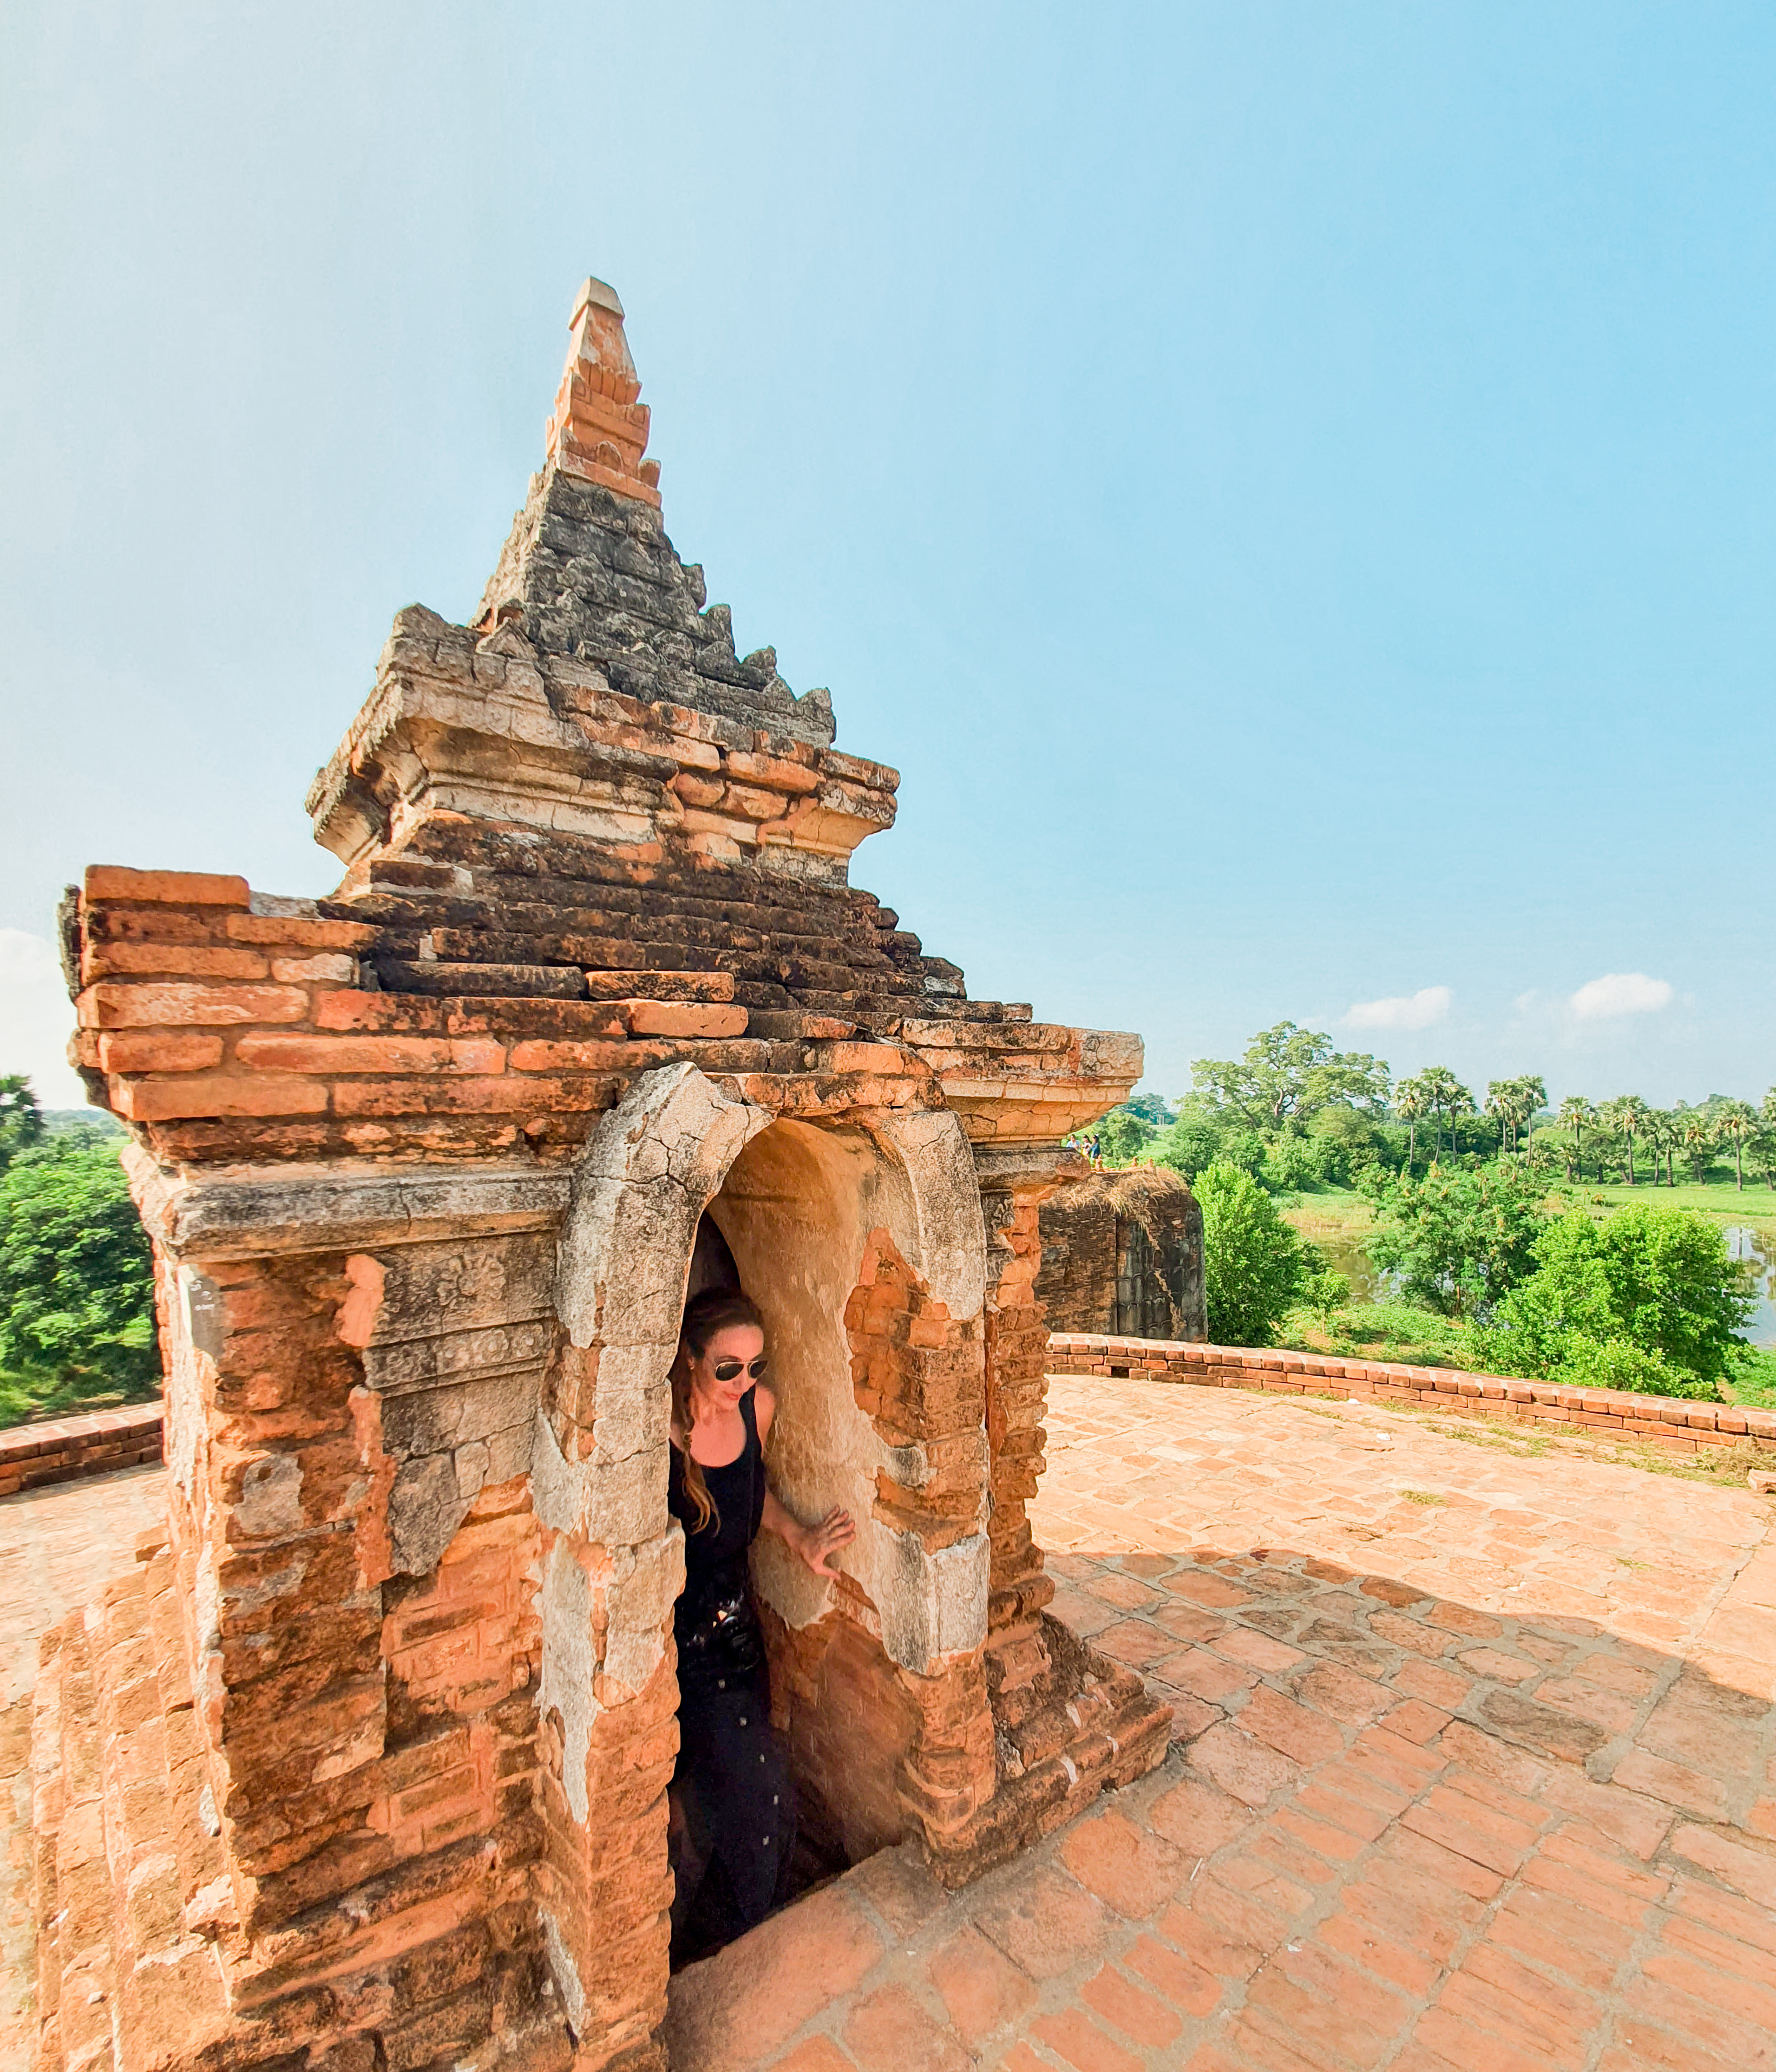 Inwa temples that are accessed from Mandalay